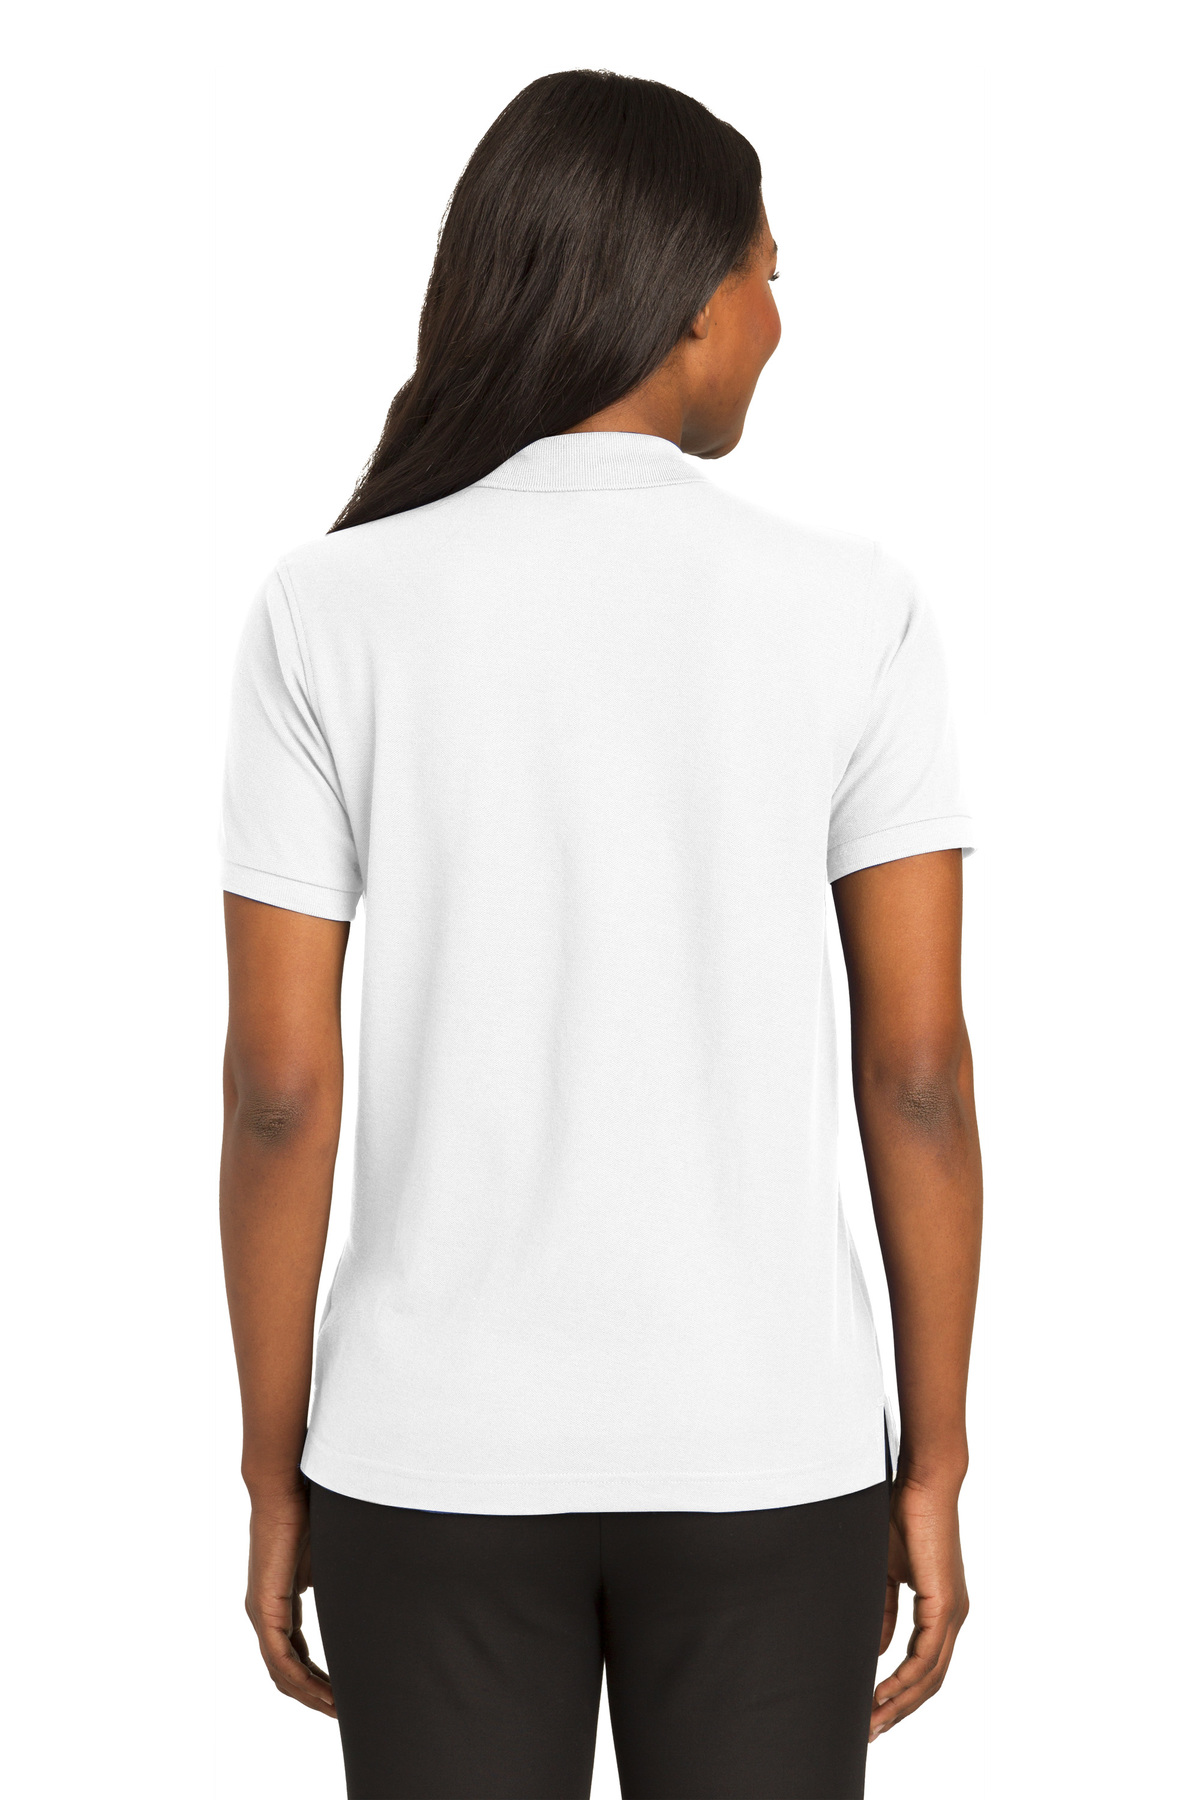 Port Authority Ladies Silk Touch™ Polo | Product | Port Authority